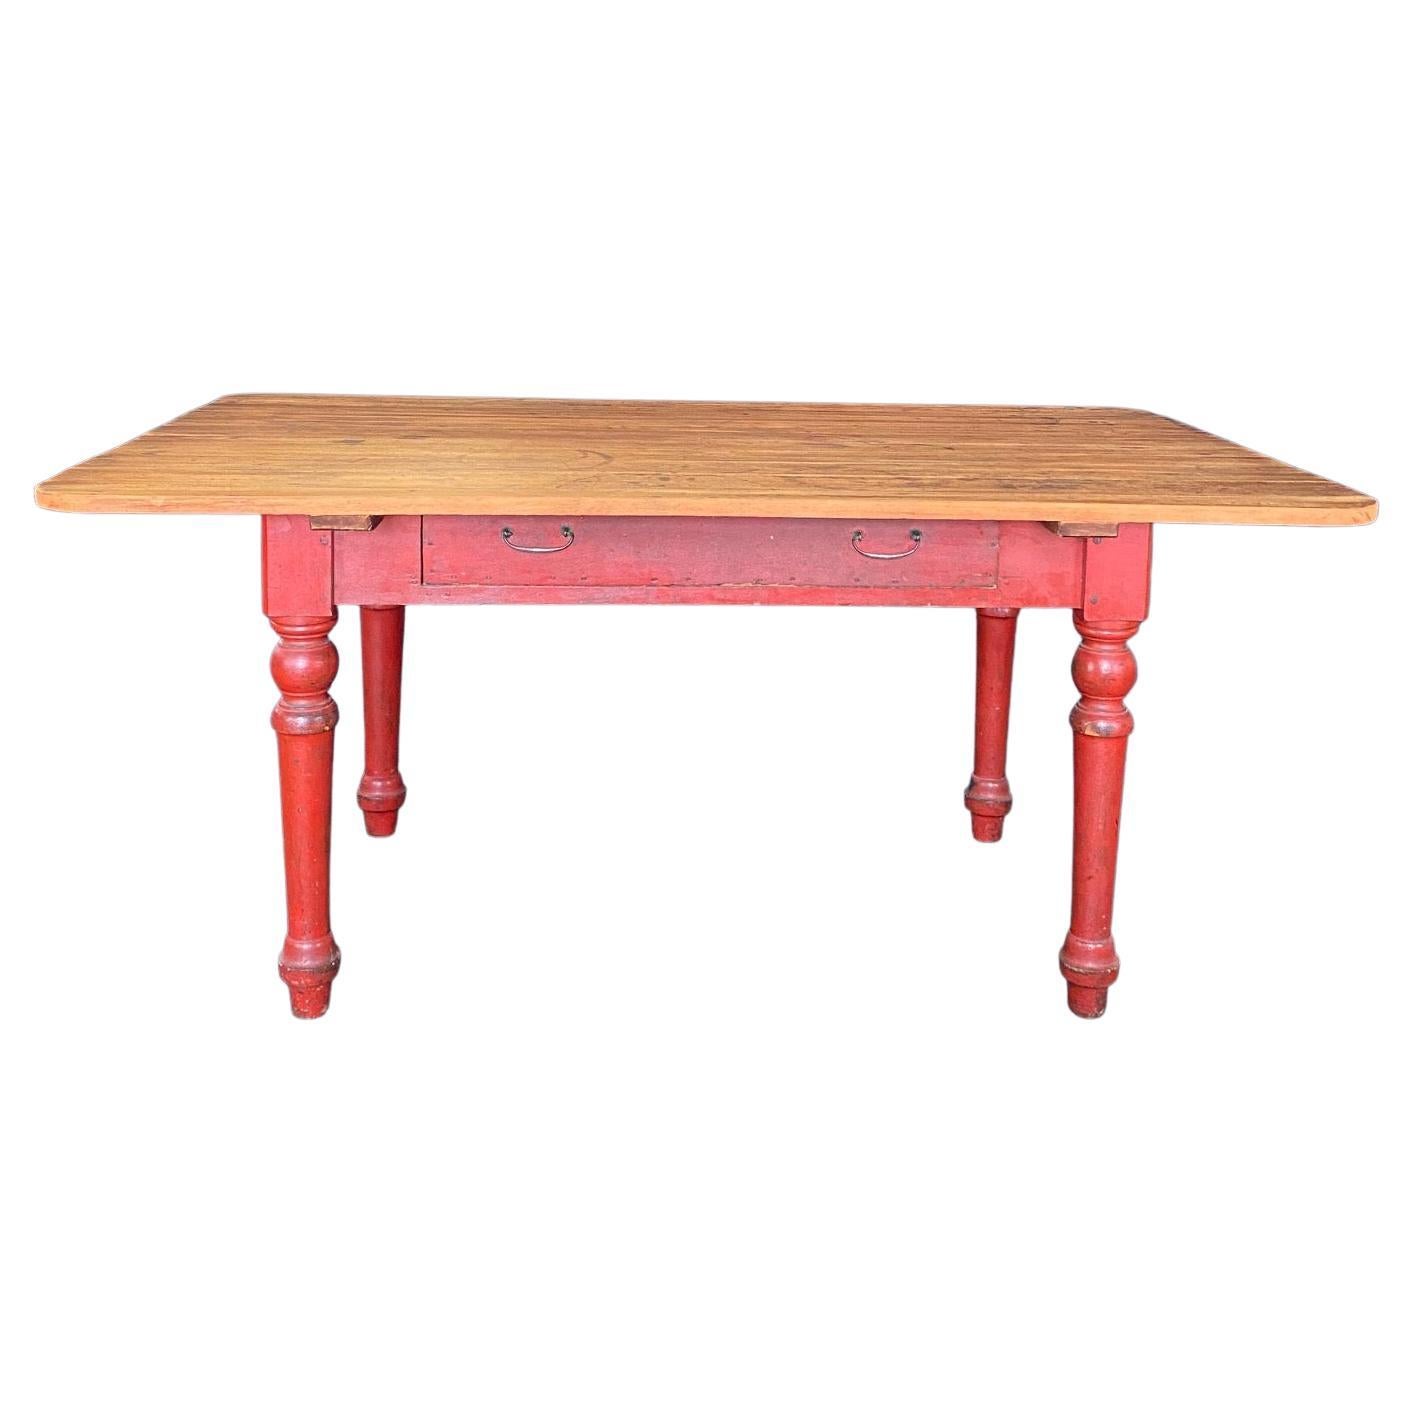 Fabulous Red Painted 19th Century Rustic Pine Farmhouse Dining Table or Desk